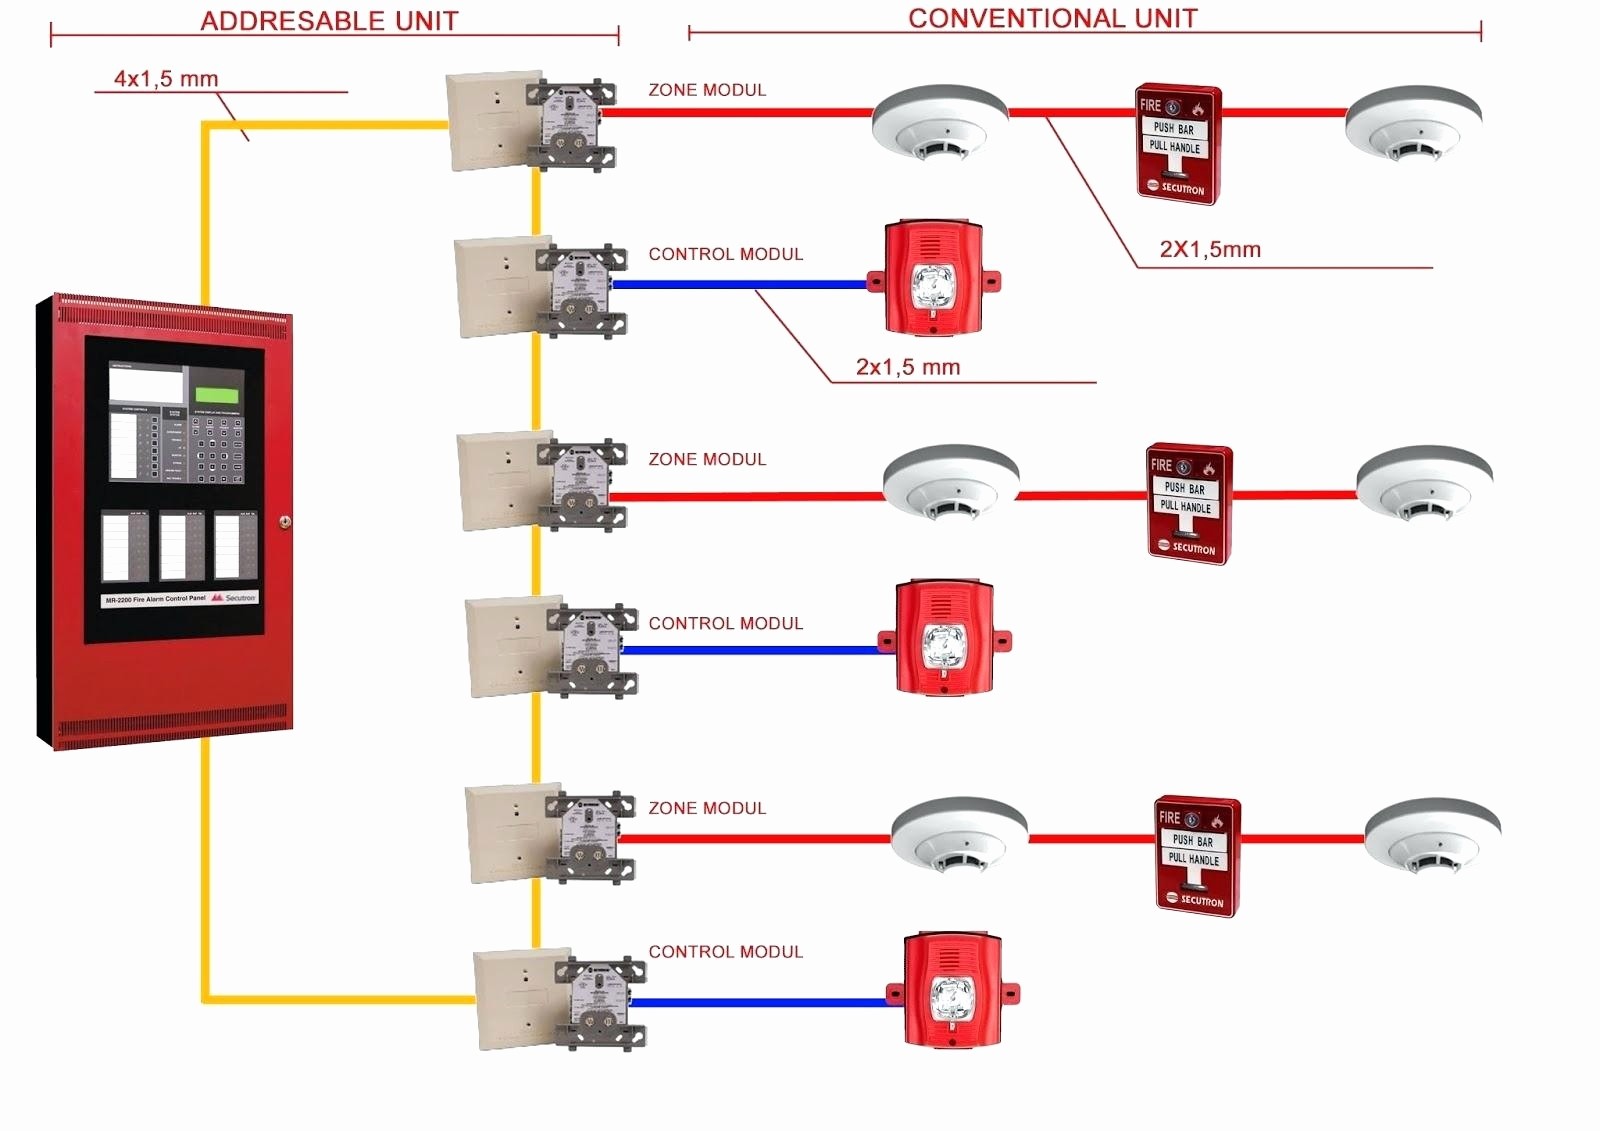 Access Control Wiring Diagram Unique Notifier Fire Alarm System Wiring Diagram Diy Enthusiasts Wiring Access